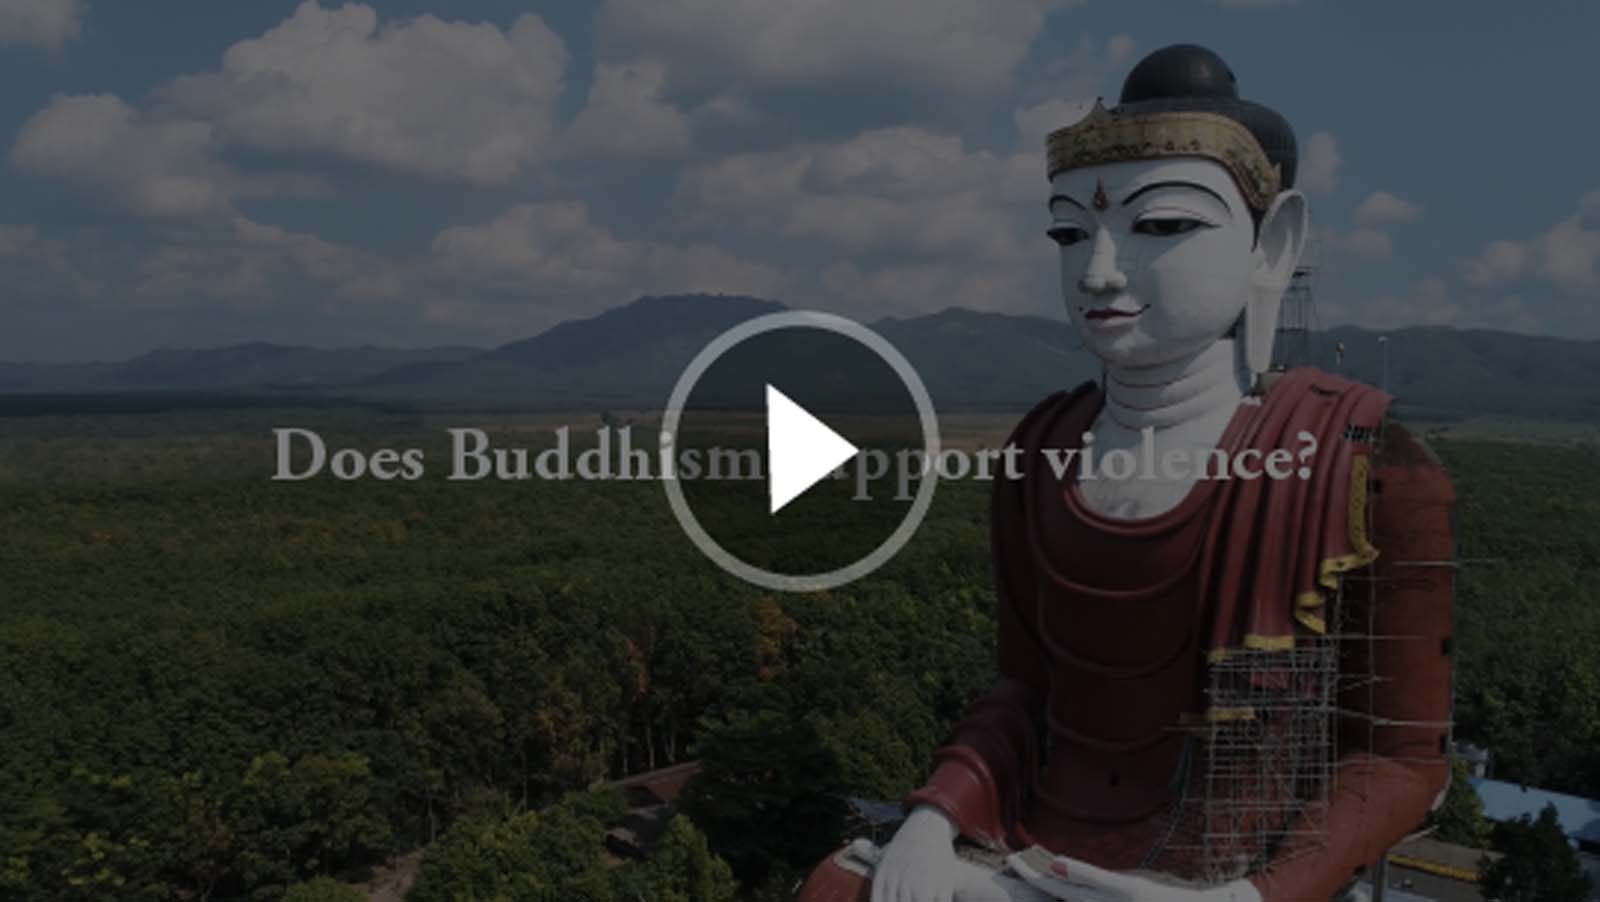 Can we use violence to protect Buddhism?